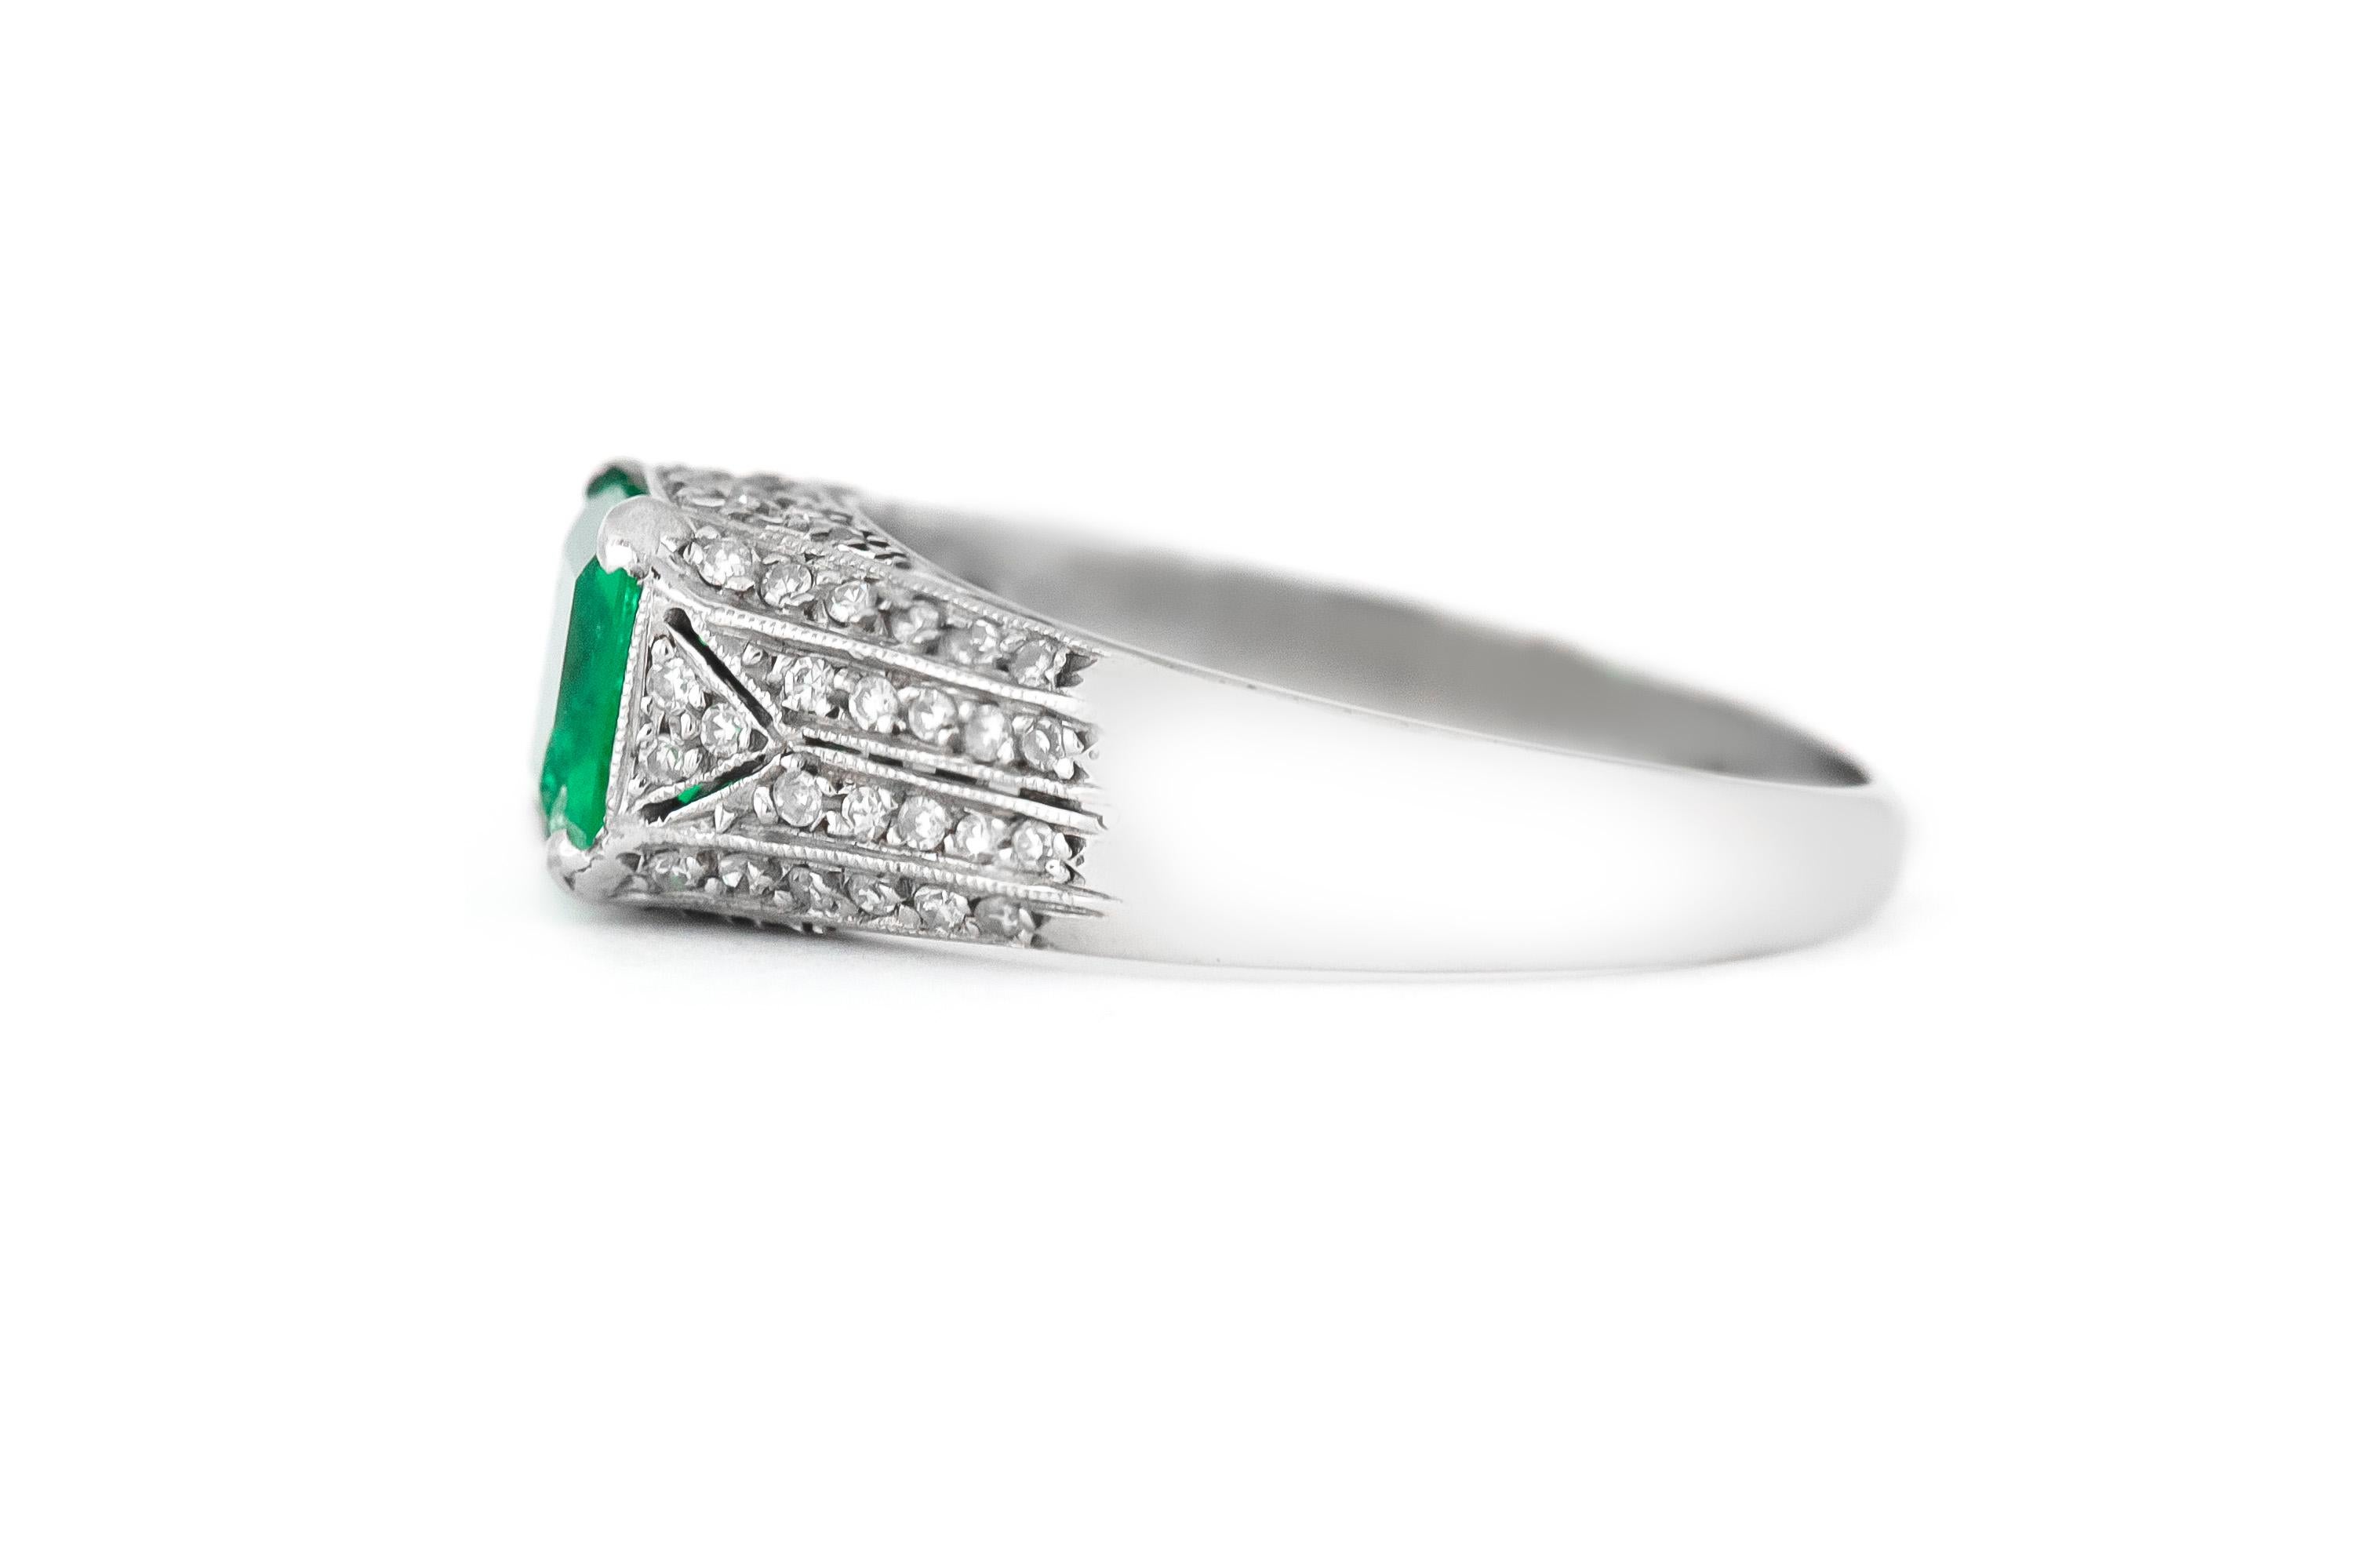 The ring is finely crafted in platinum with emerald weighing approximately total of 1.00 and diamonds weighing approximately total of 0.60 carat.
Circa 1930